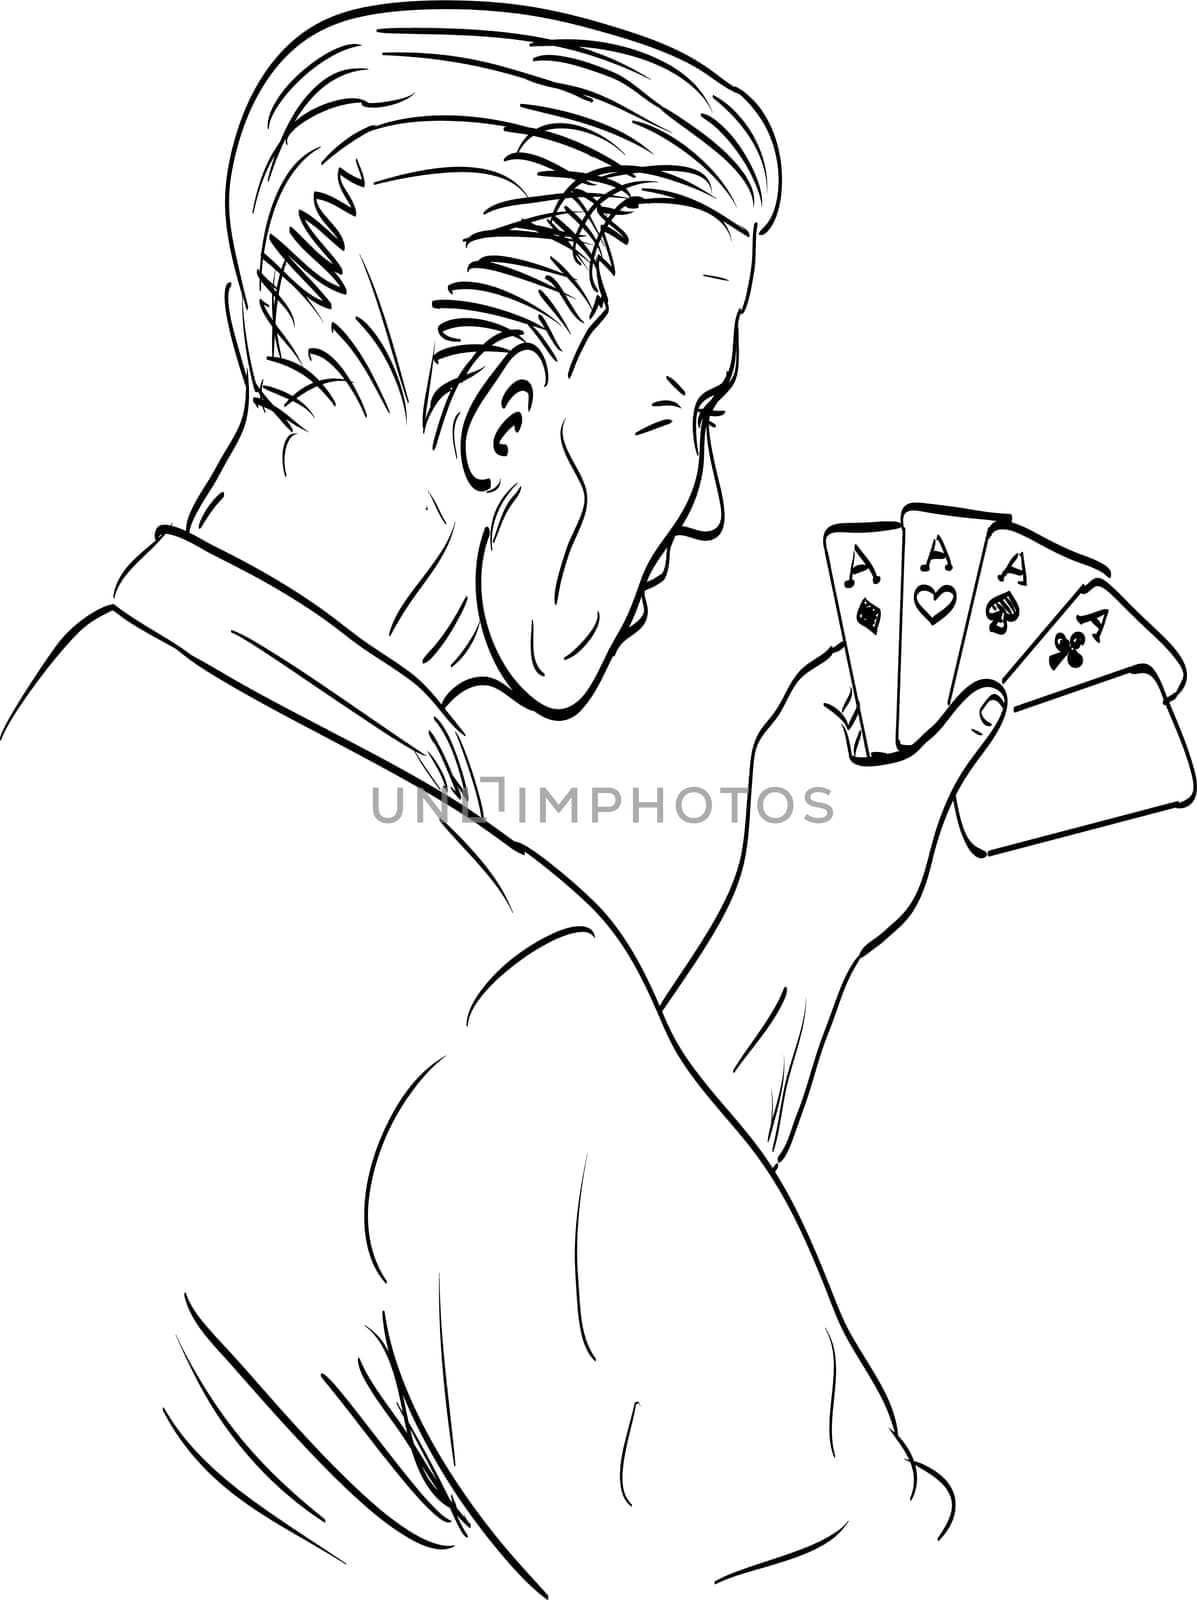 Drawing sketch style illustration of a gambler holding deck of cards viewed from rear on isolated white background.